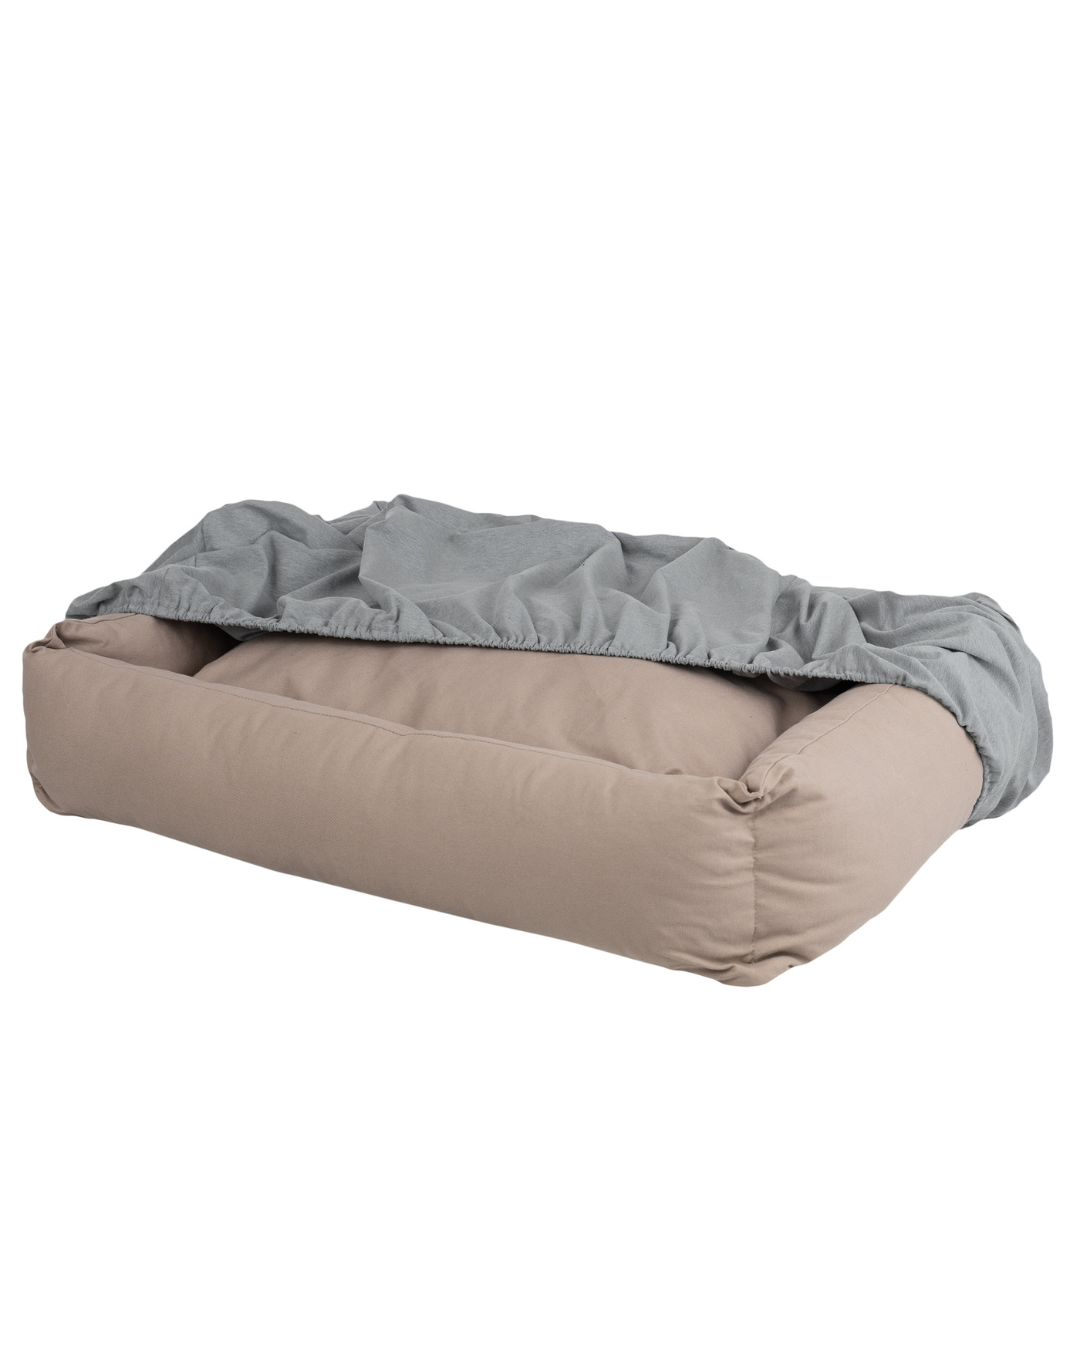 PAIKKA Recovery Bed Cover